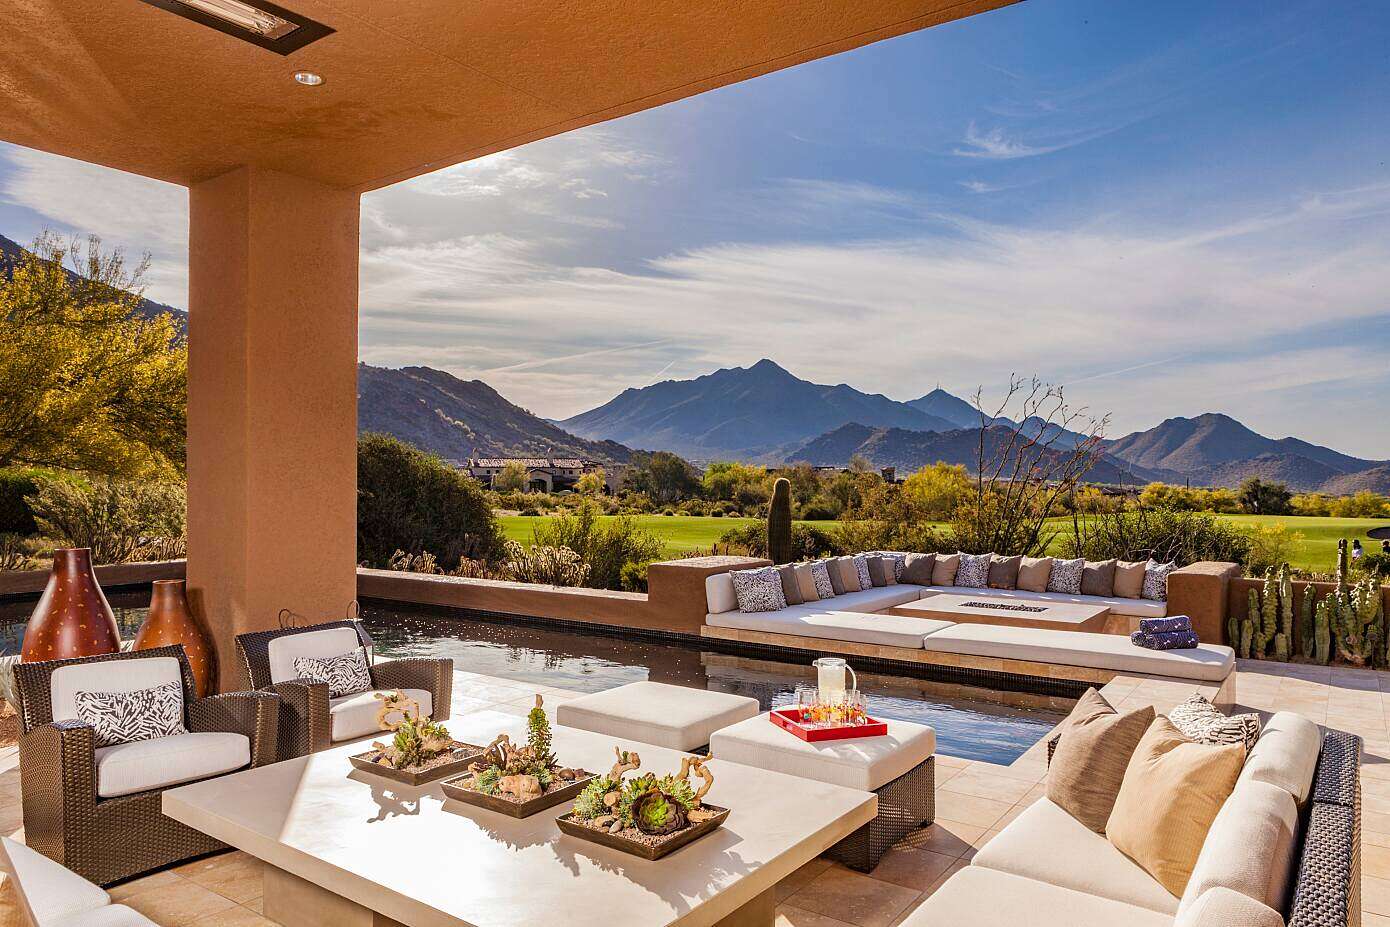 House in North Scottsdale by PHX Architecture